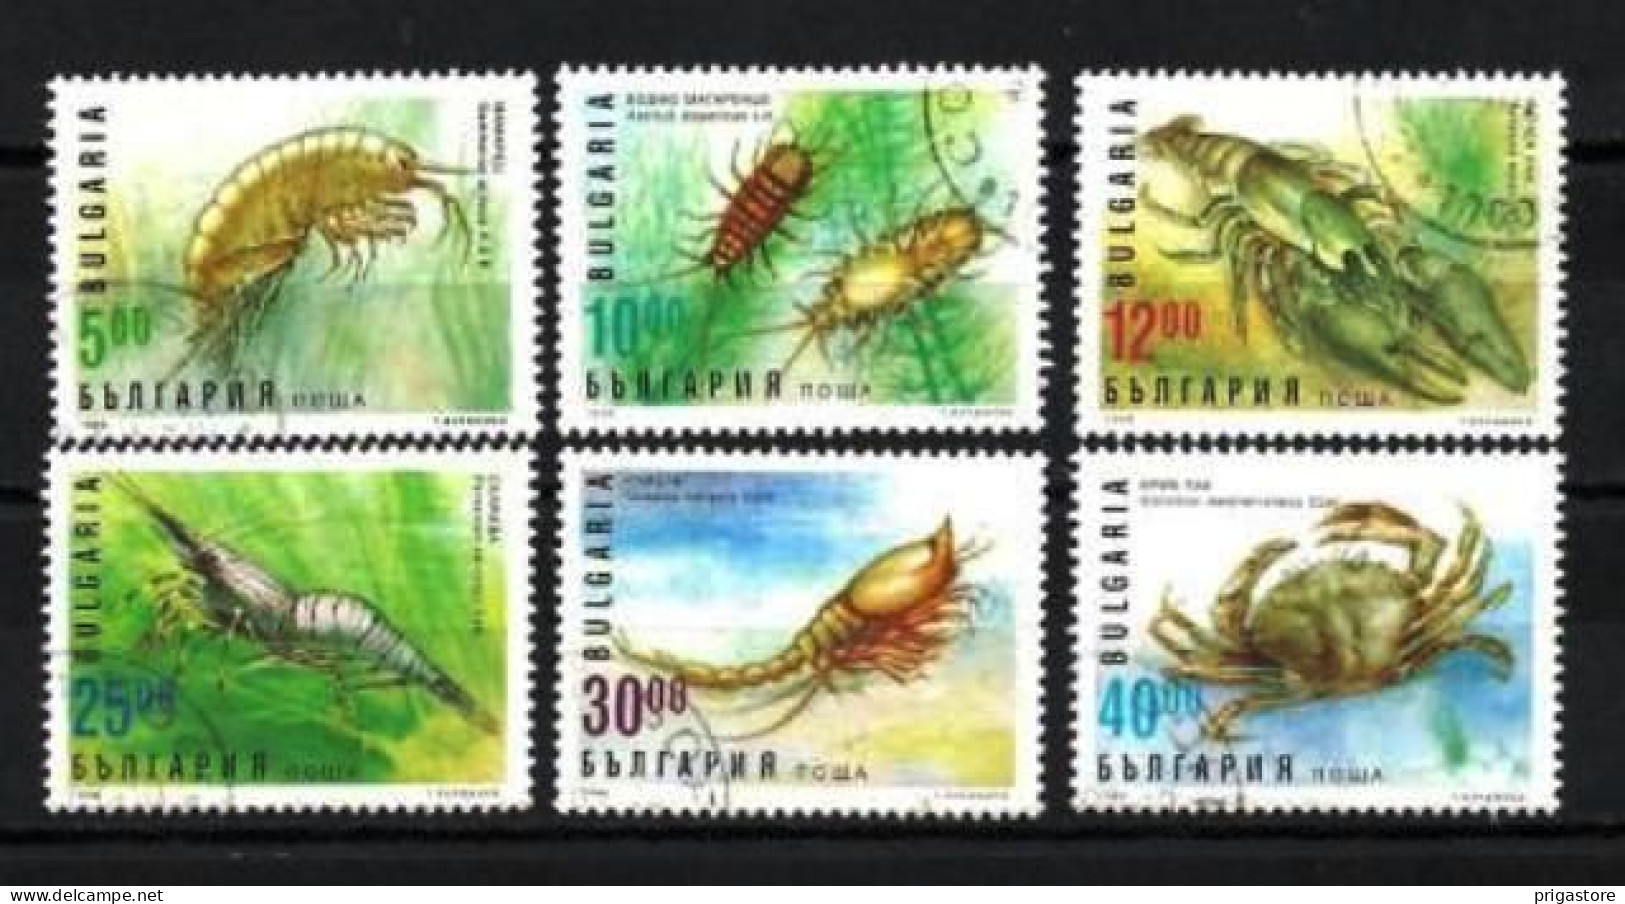 Bulgarie 1996 Animaux Crustacés (85) Yvert N° 3682 à 3687 Oblitérés Used - Used Stamps